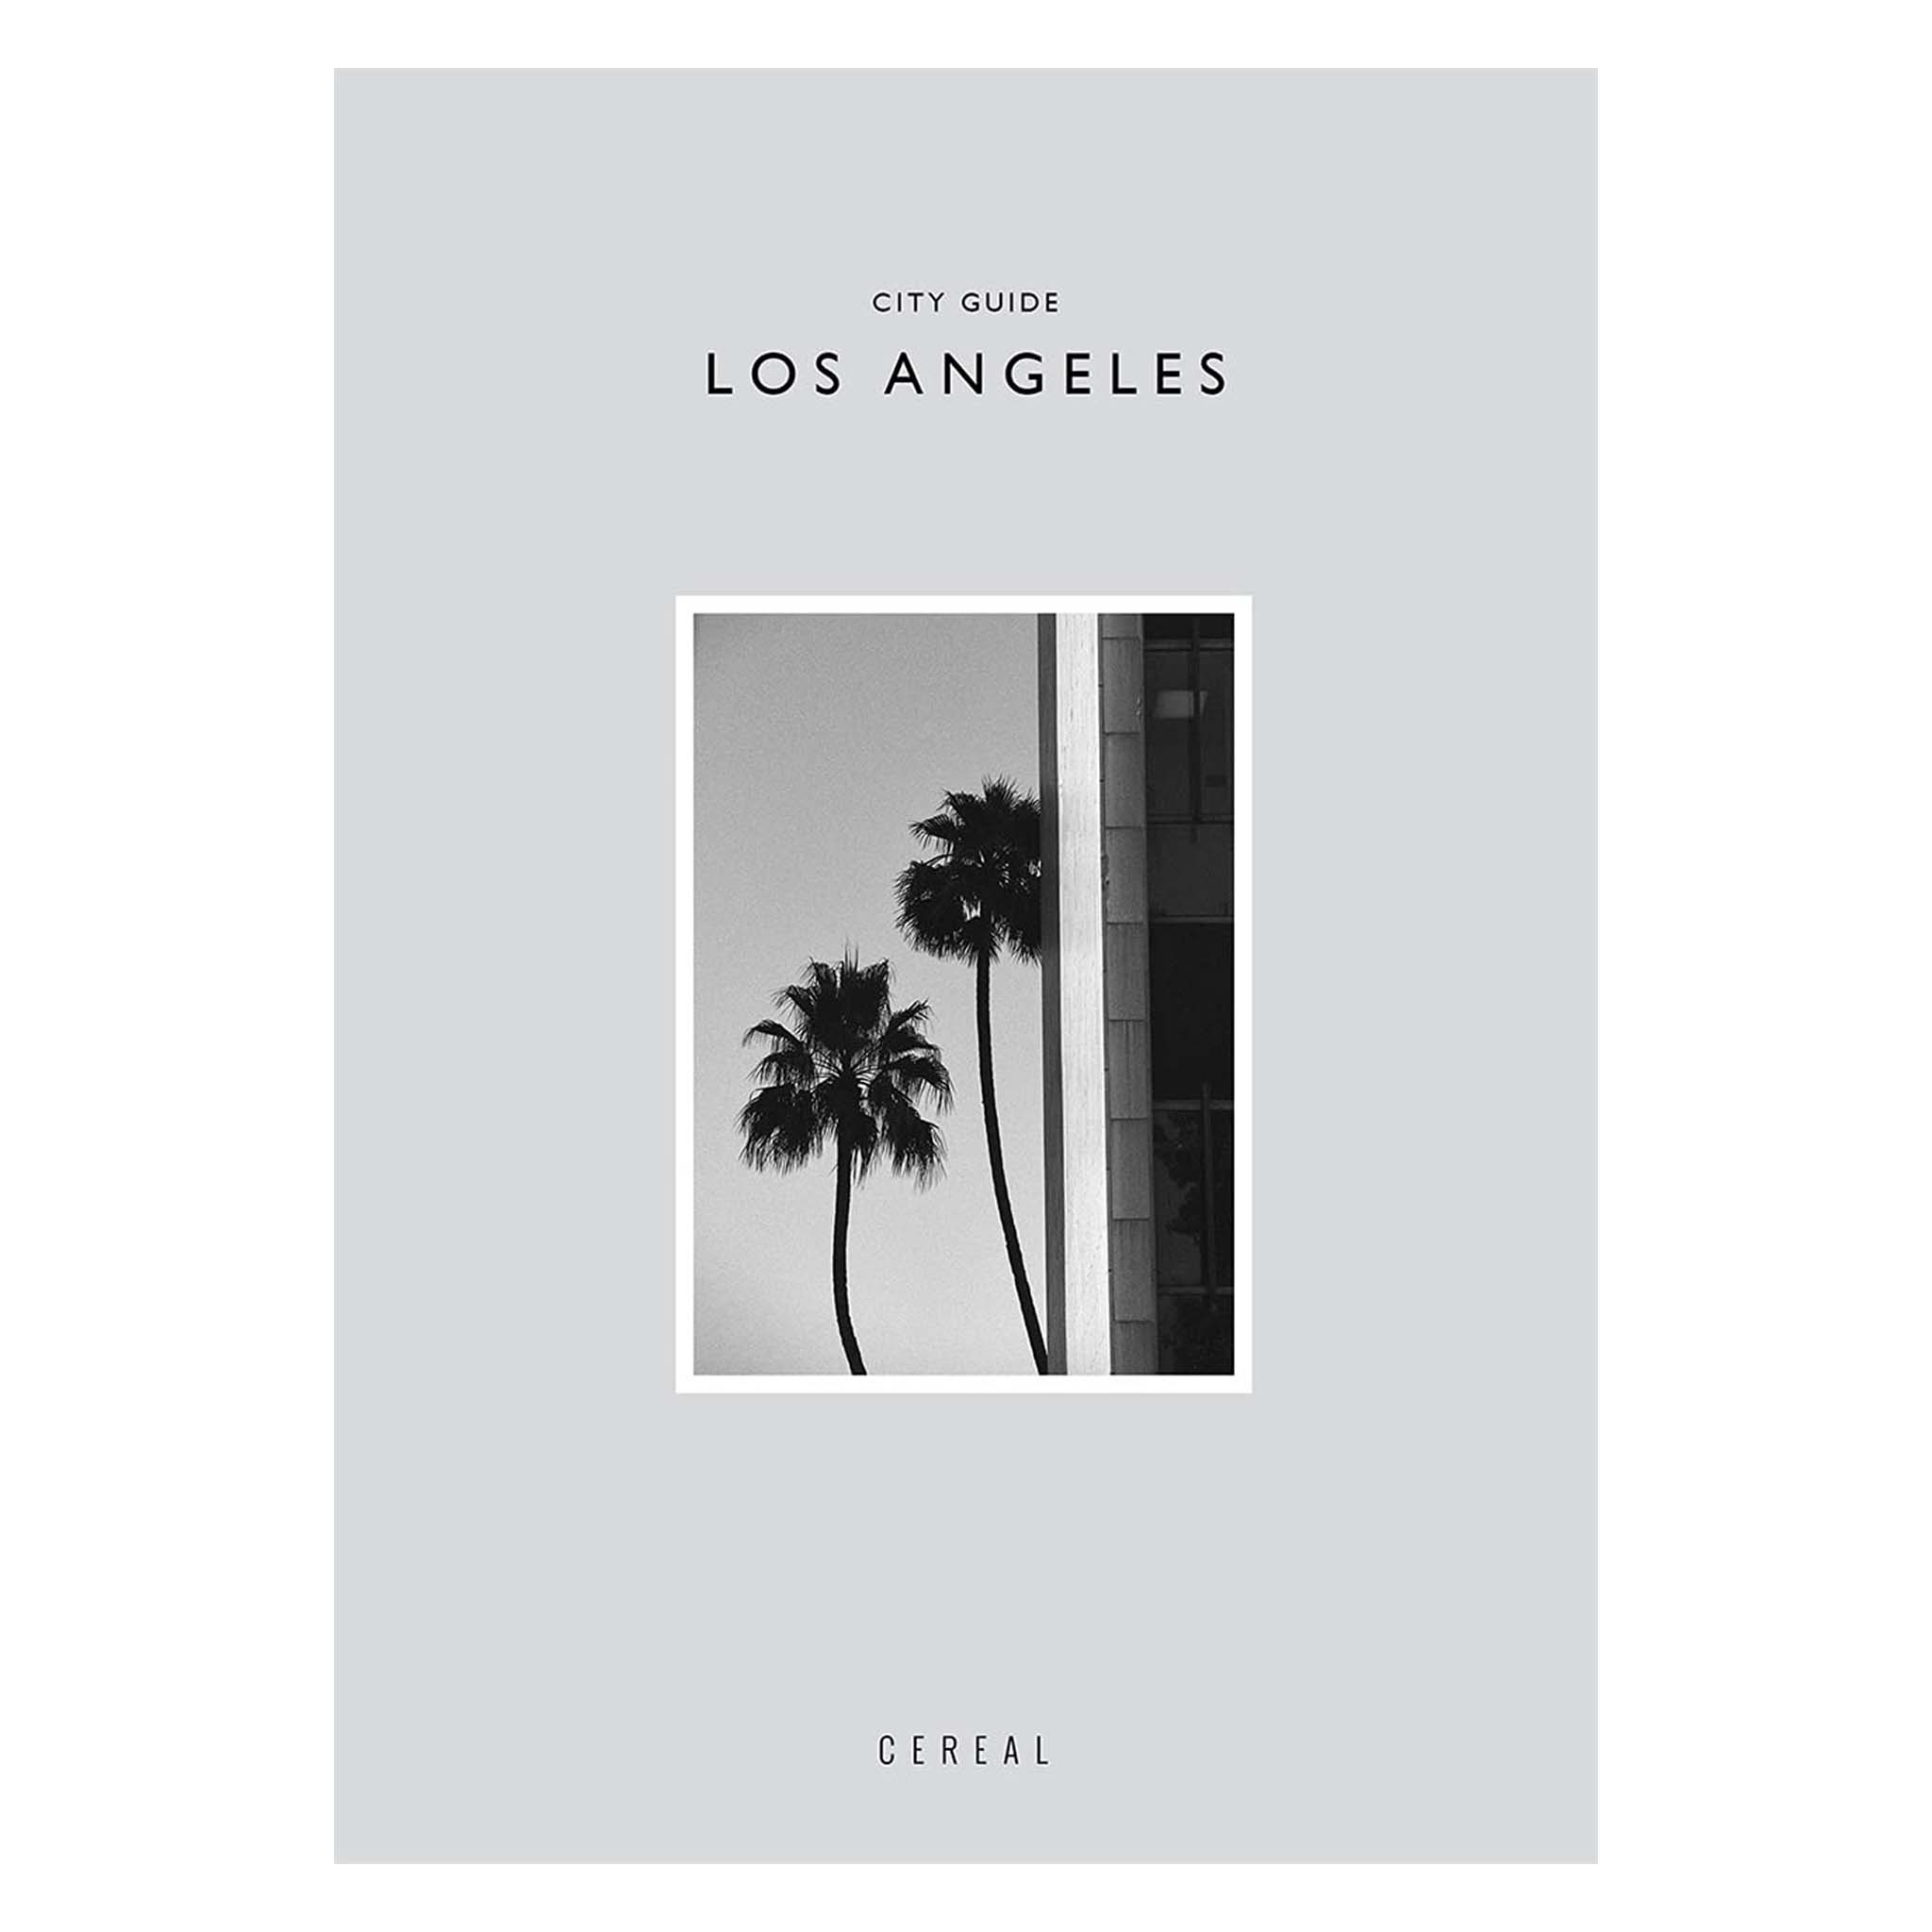 CEREAL CITY GUIDE - LOS ANGELES